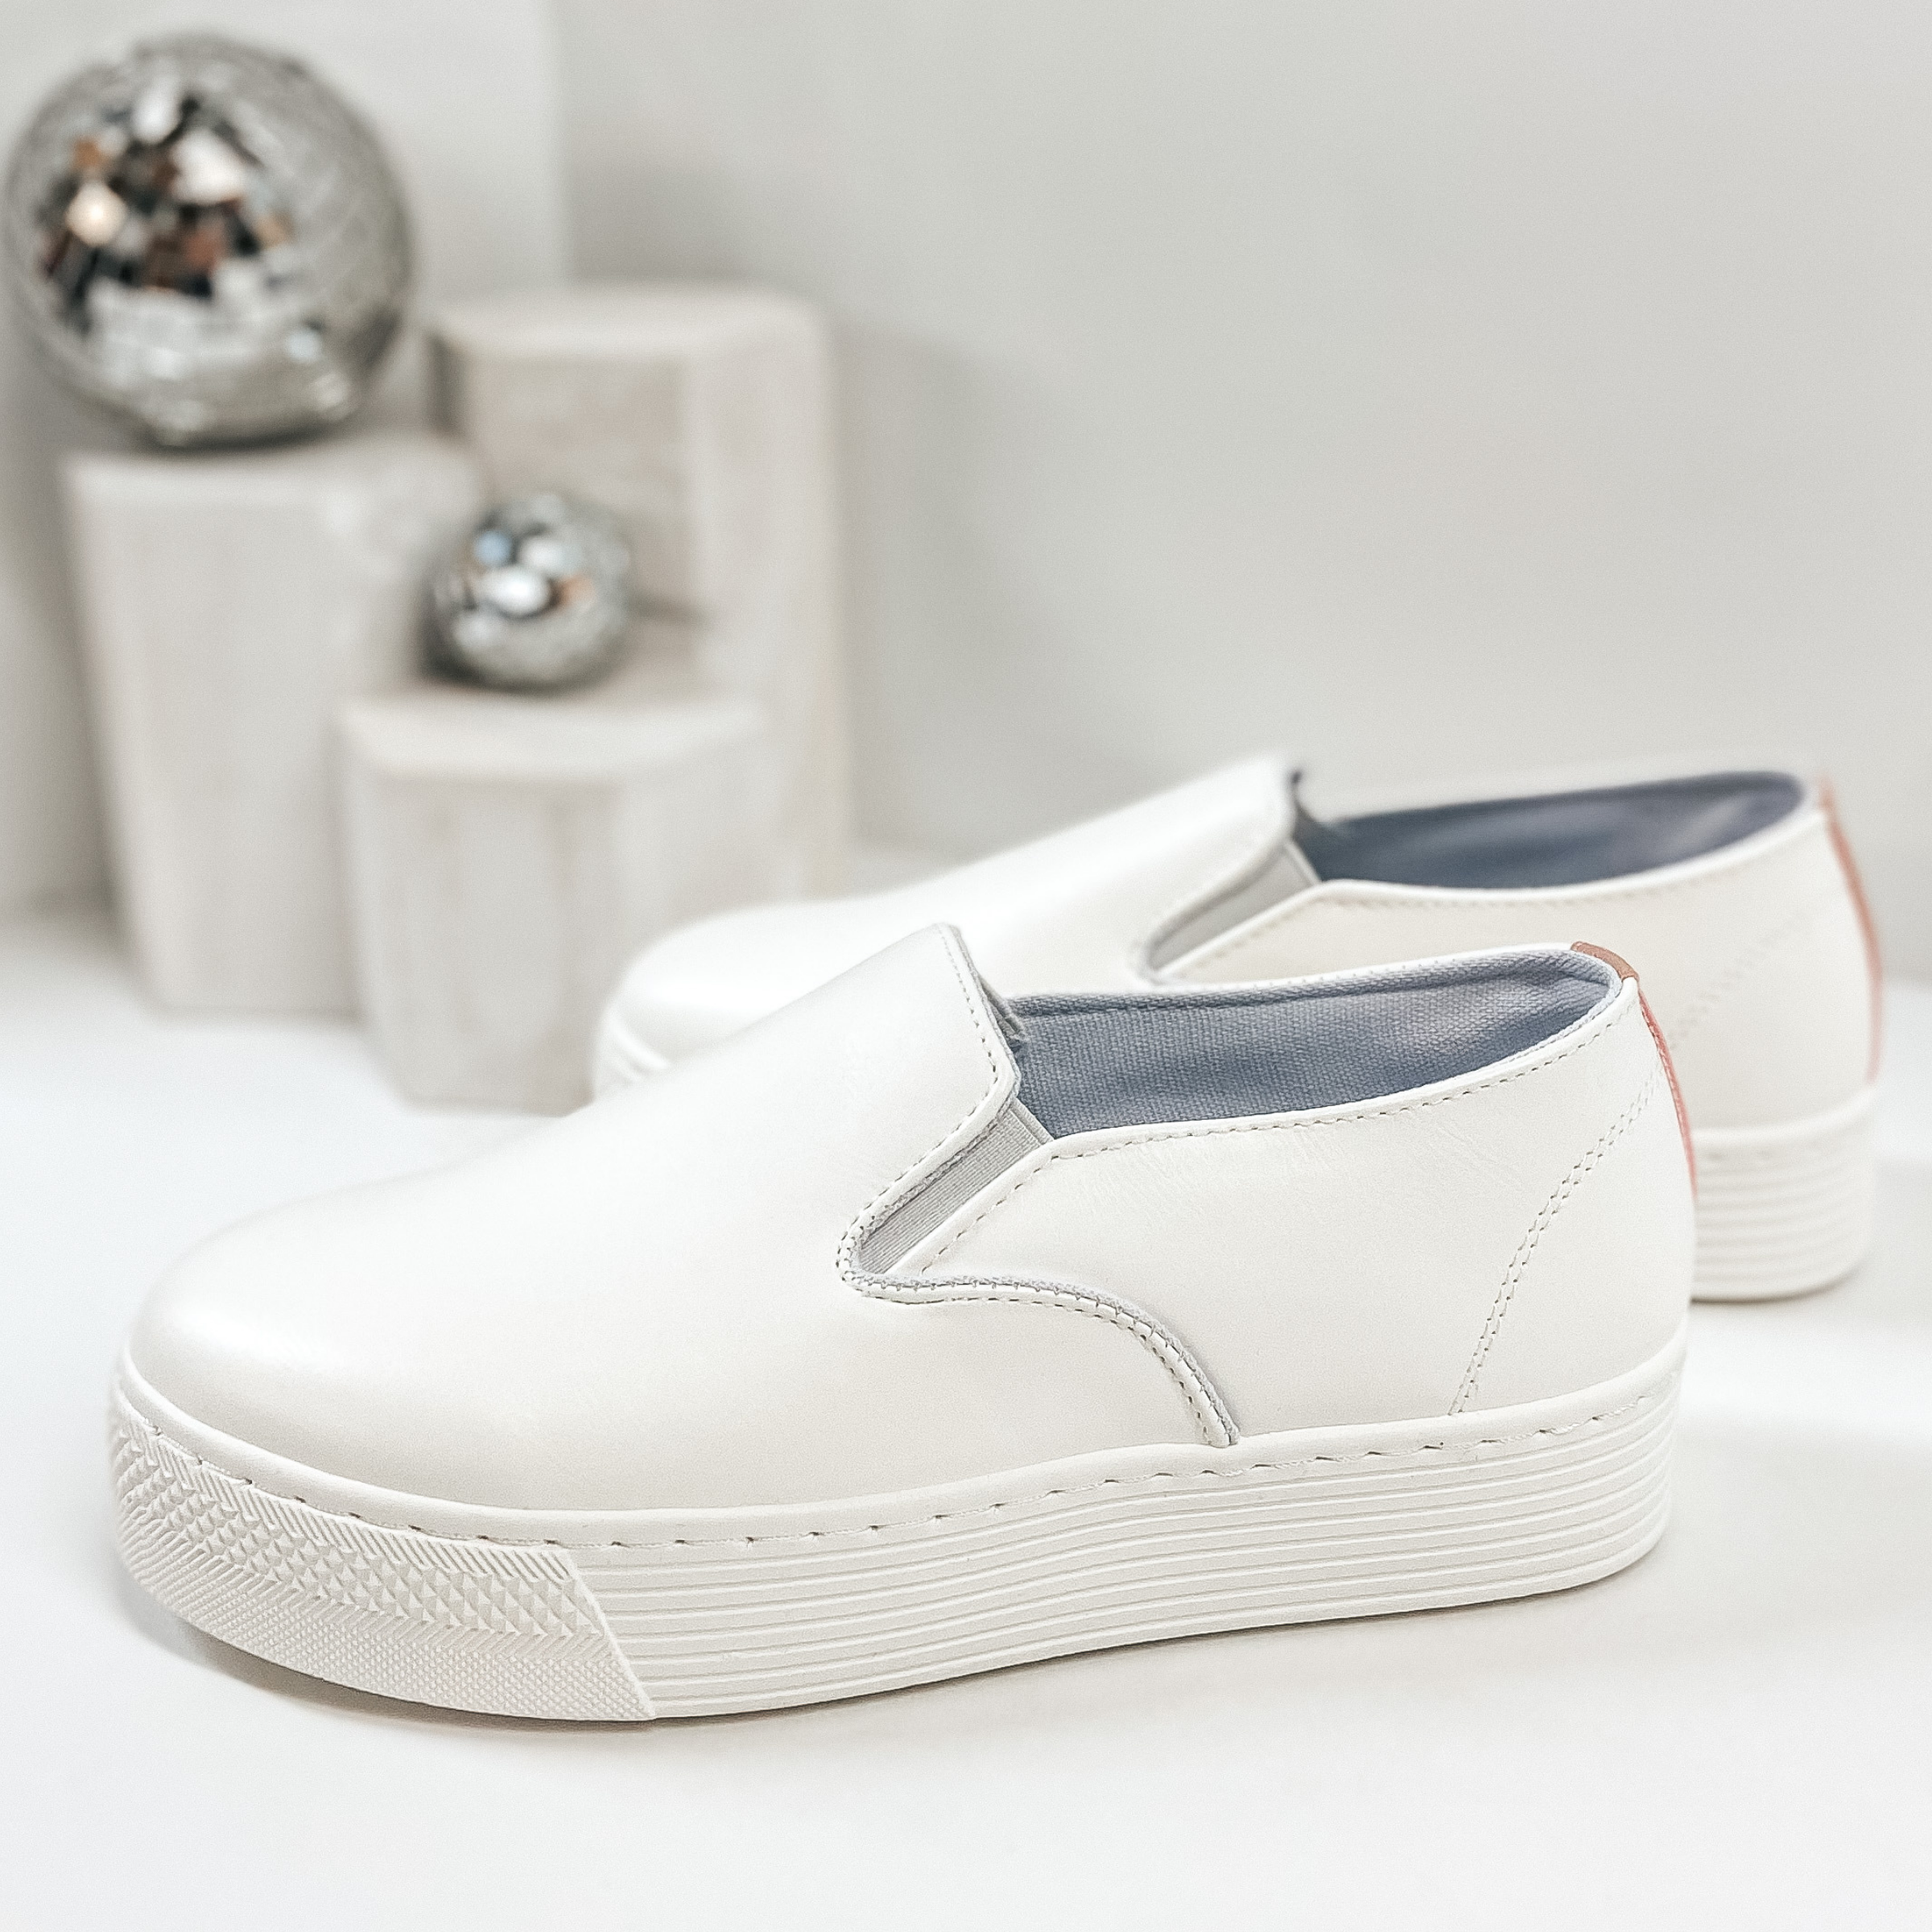 White thick sole sneakers that slip on. Pictured on white background with disco balls.